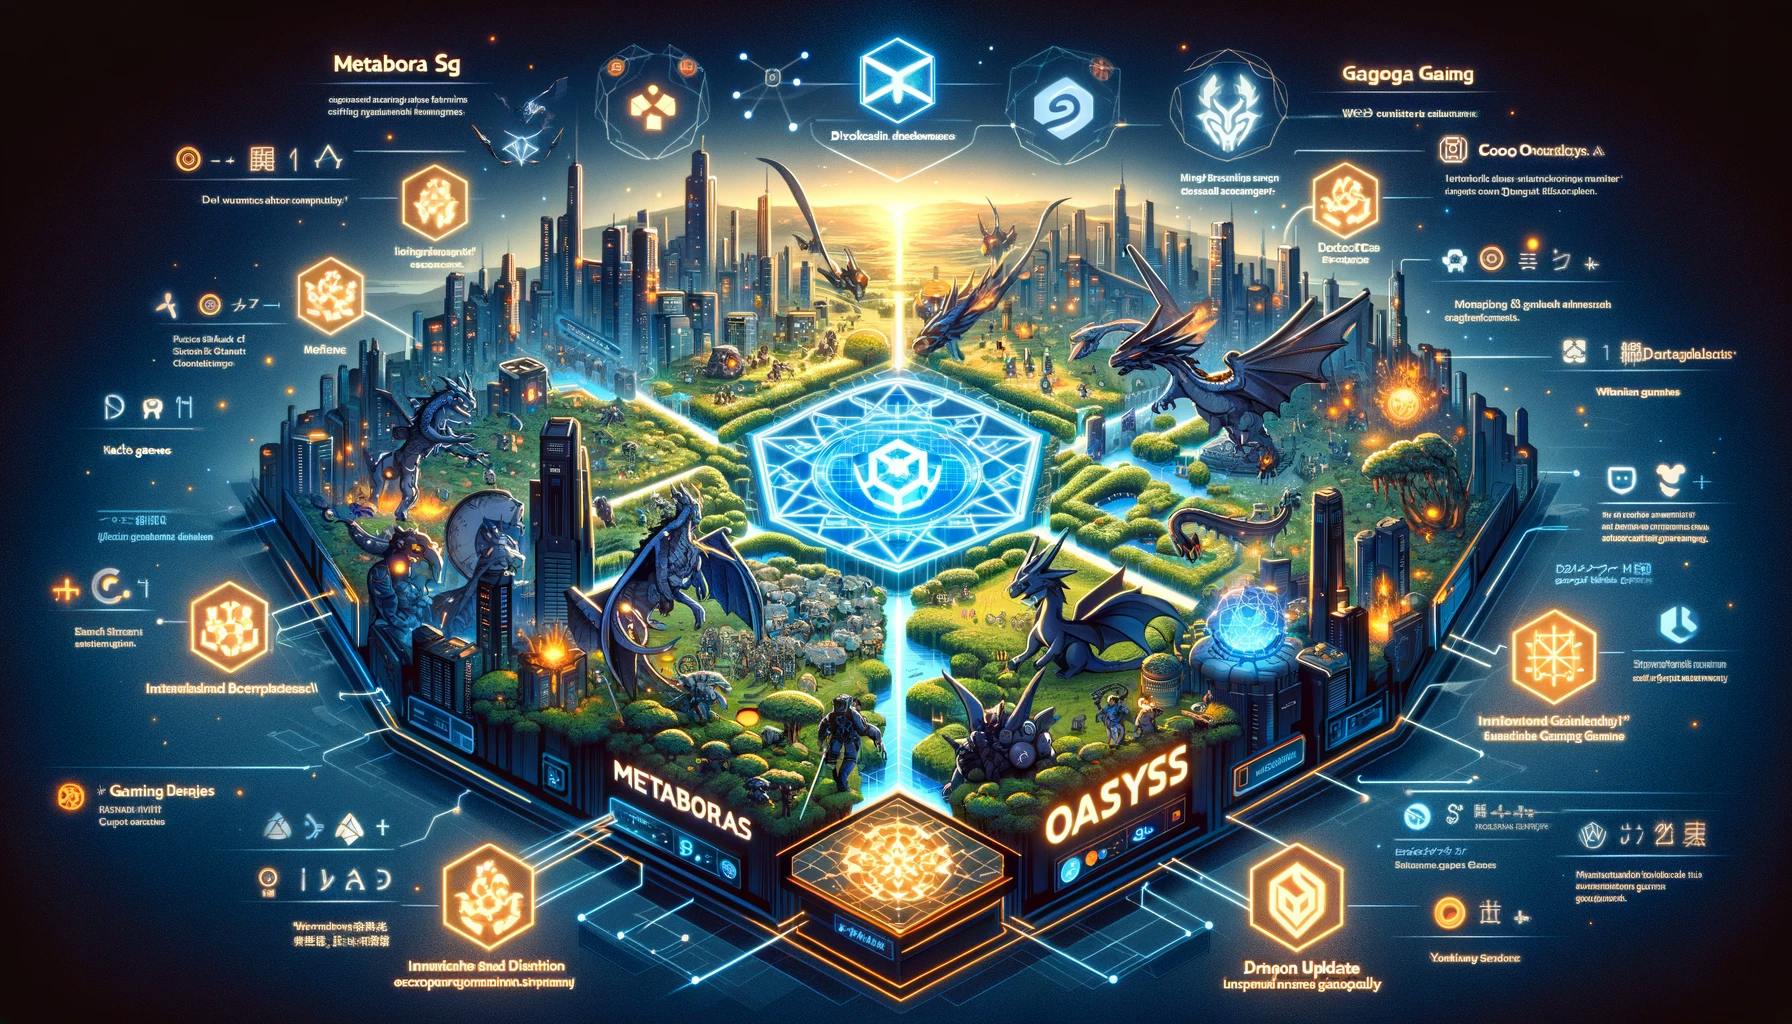 DALL·E 2024-02-23 12.45.13 - Visualize the strategic alliance between METABORA SG, a Web3 gaming division of Kakao Games, and Oasys, a blockchain platform focusing on gaming. Depi